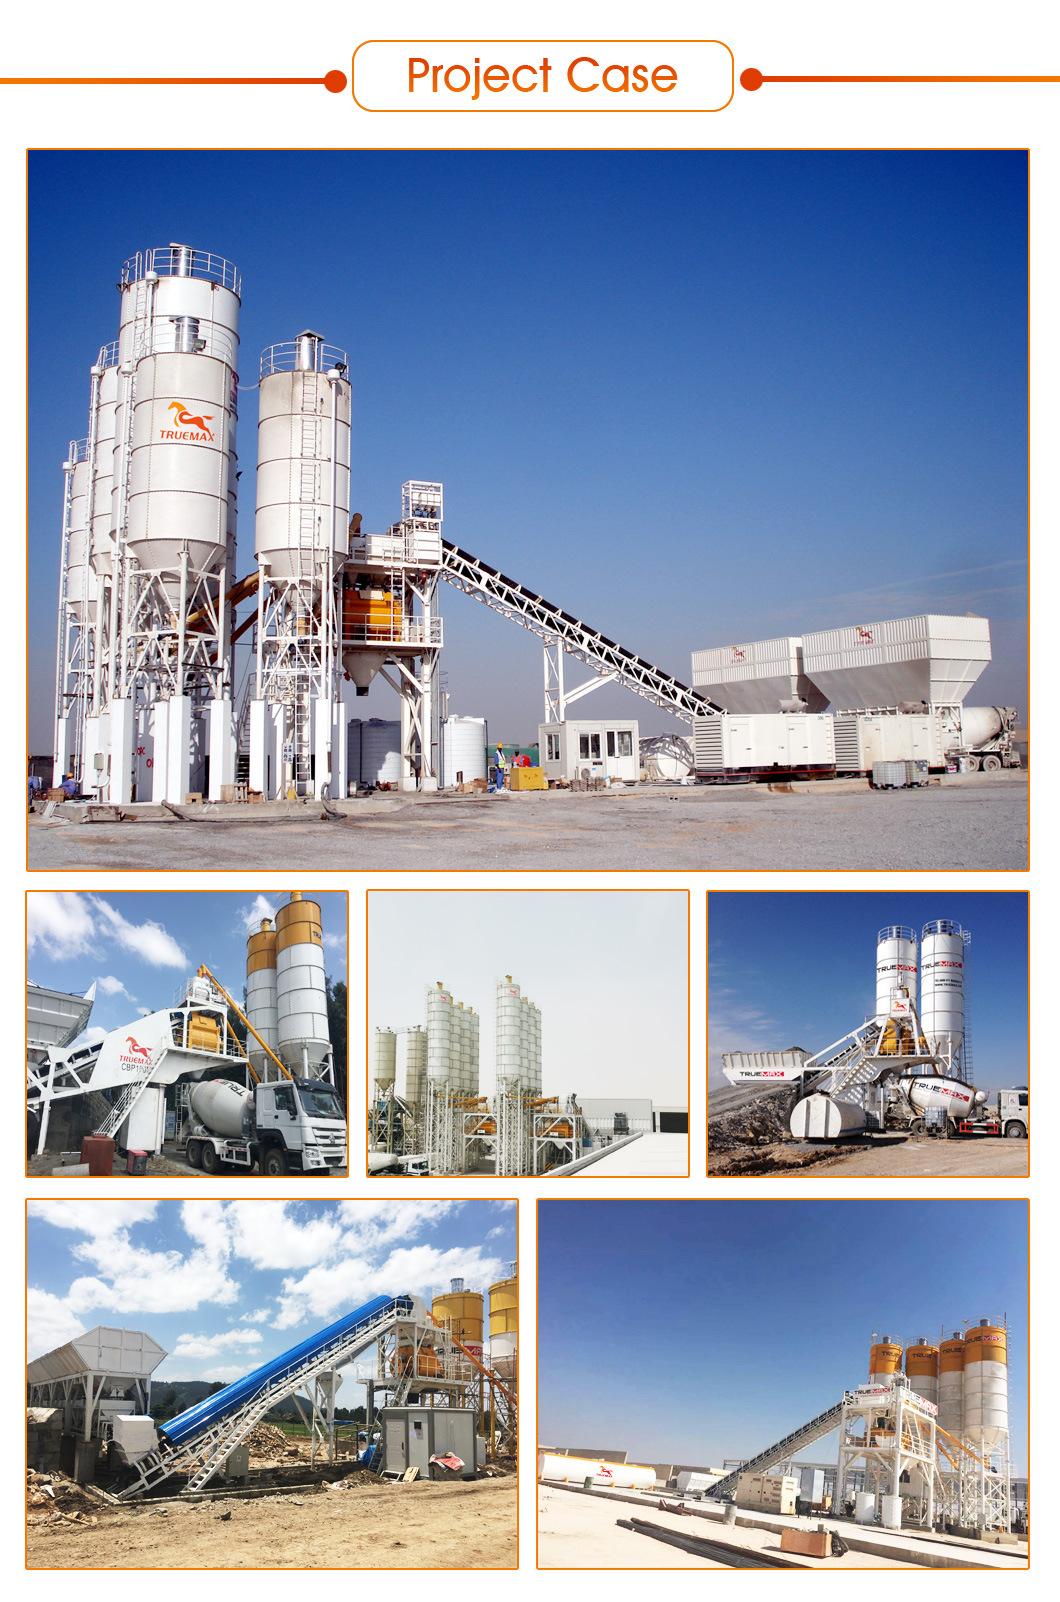 China Manufacture Concrete Batching Plant with Ce Certification